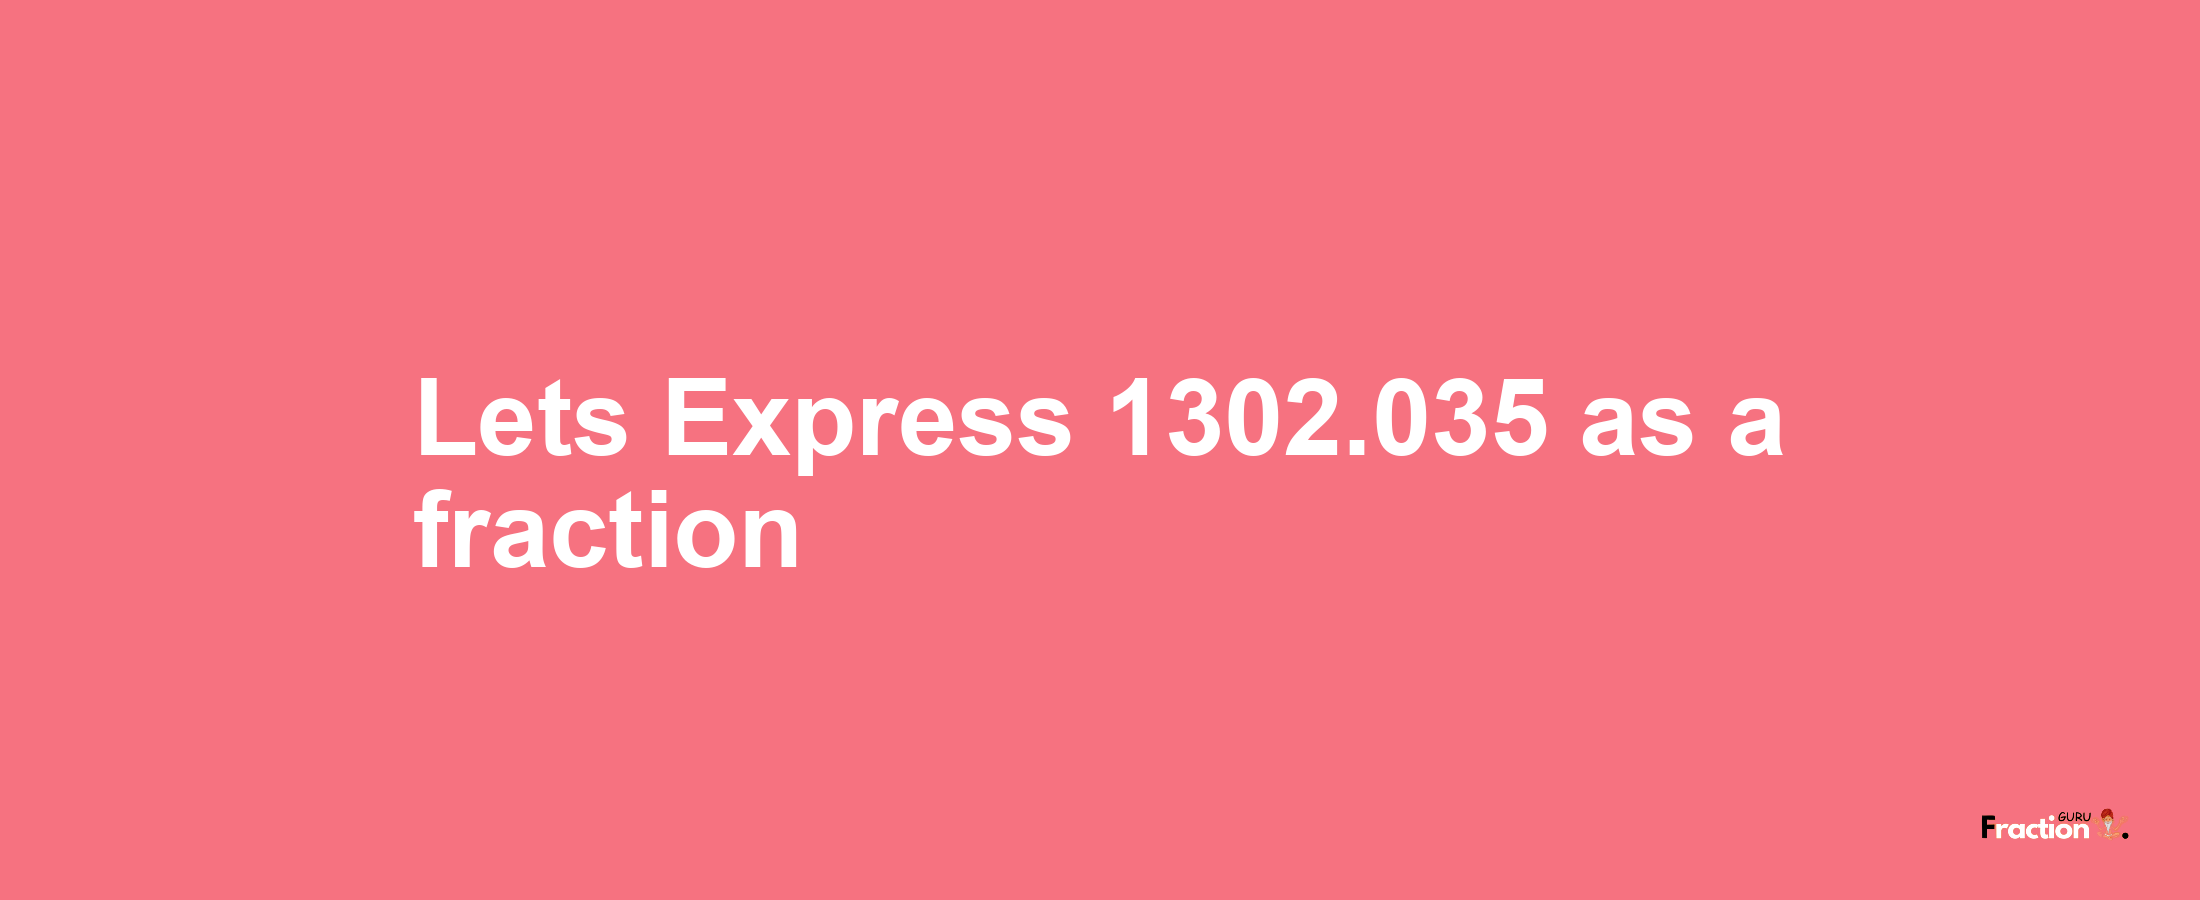 Lets Express 1302.035 as afraction